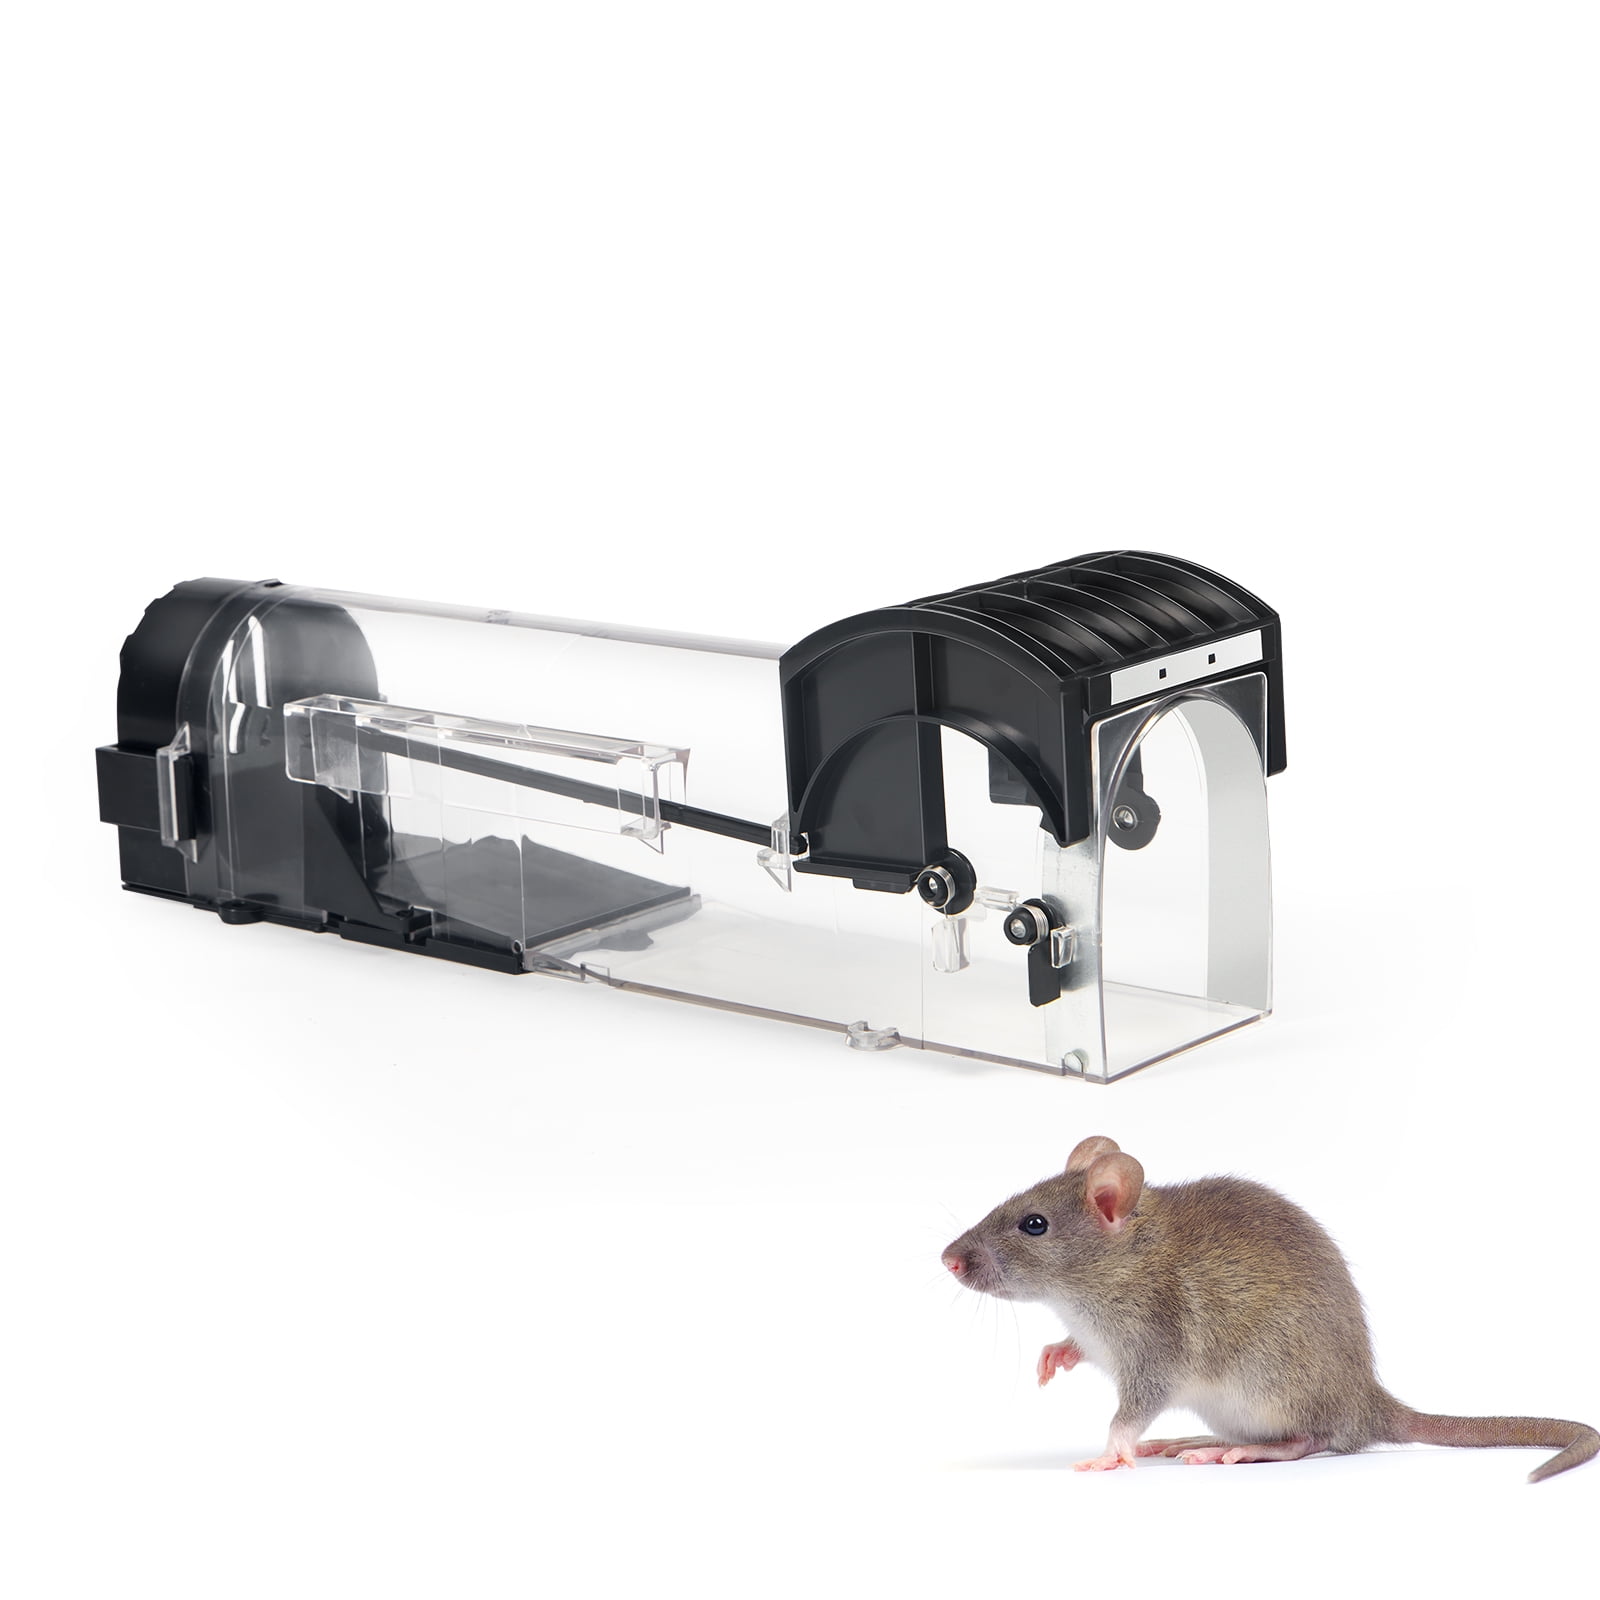 Athletic Mice Try To Avoid Getting Caught In This Simple Mouse Trap.  Mousetrap Monday 